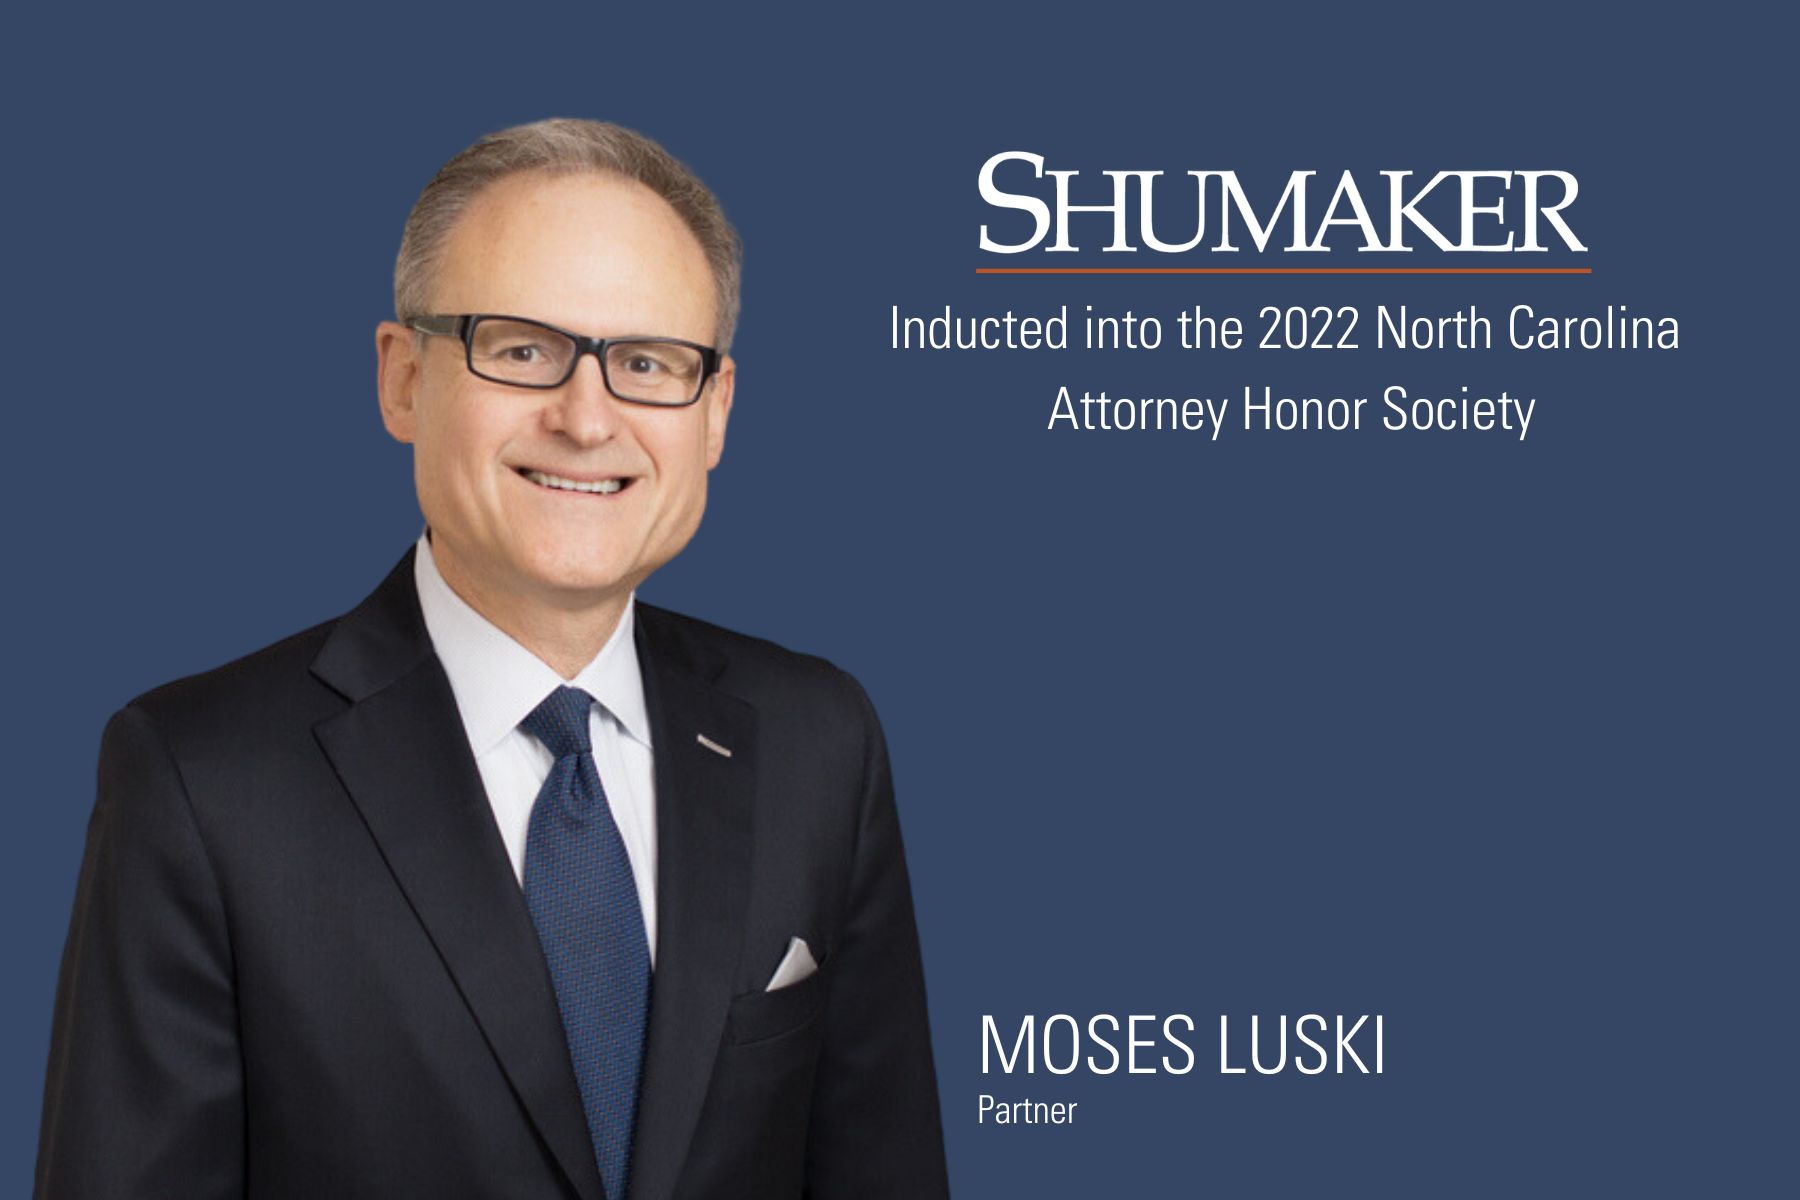 Moses Luski Recognized for Exemplary Pro Bono Service, Inducted into the 2022 North Carolina Attorney Honor Society